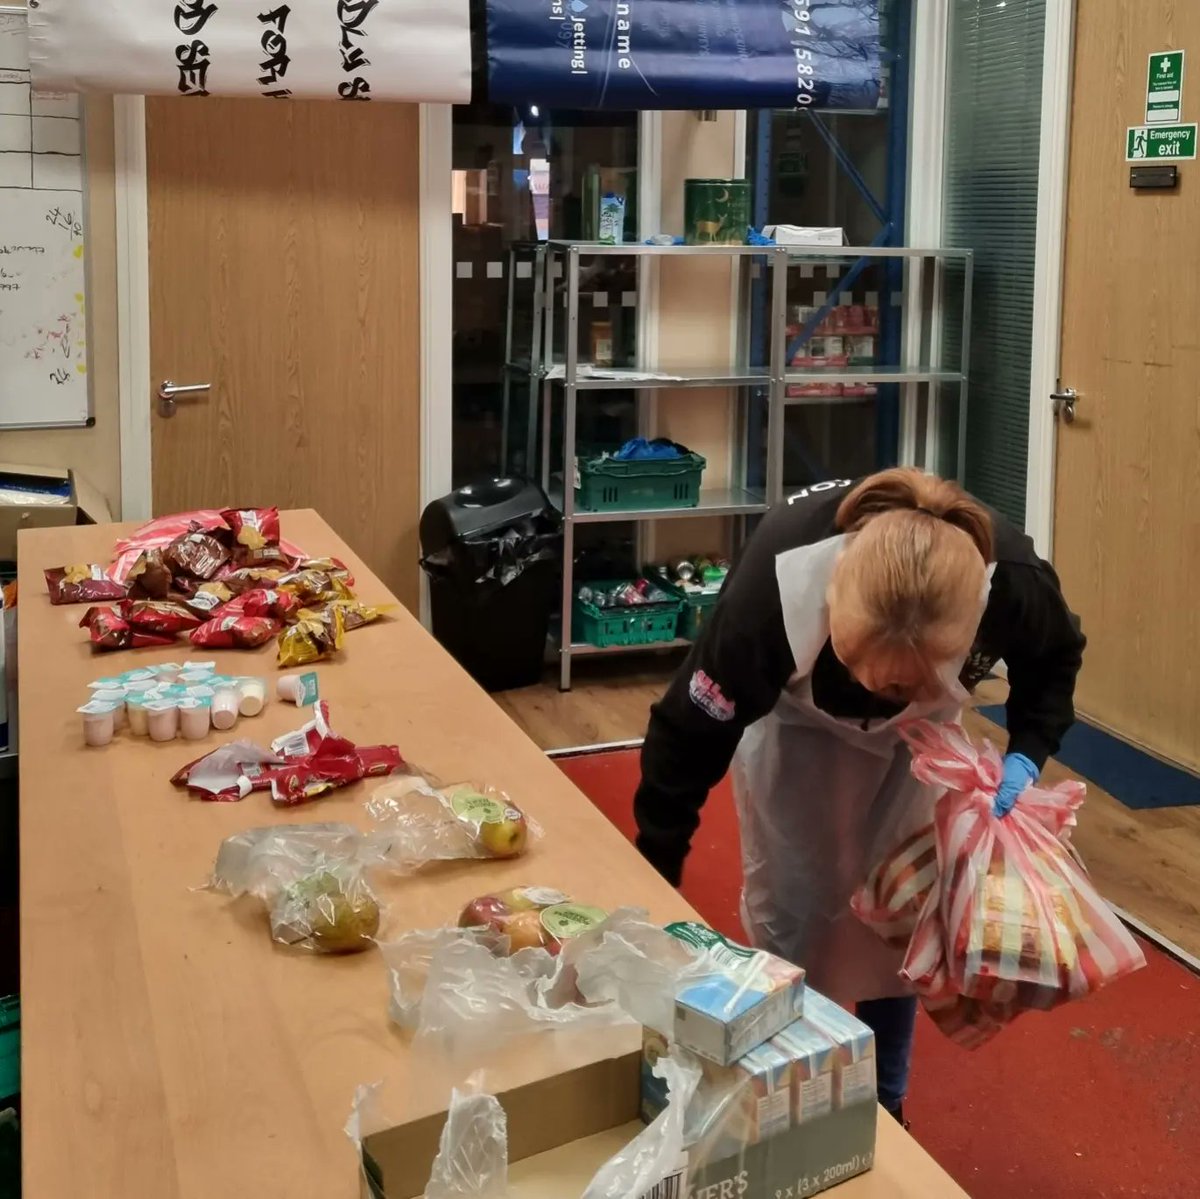 A huge thank-you to @navvy_1982 & all the team who was making packed Lunches today & alongside preparing the bags the twam also meeted and greeted the community as they visited The team should be realy proud over 30 children benfited from a meal today thanks to your contribution